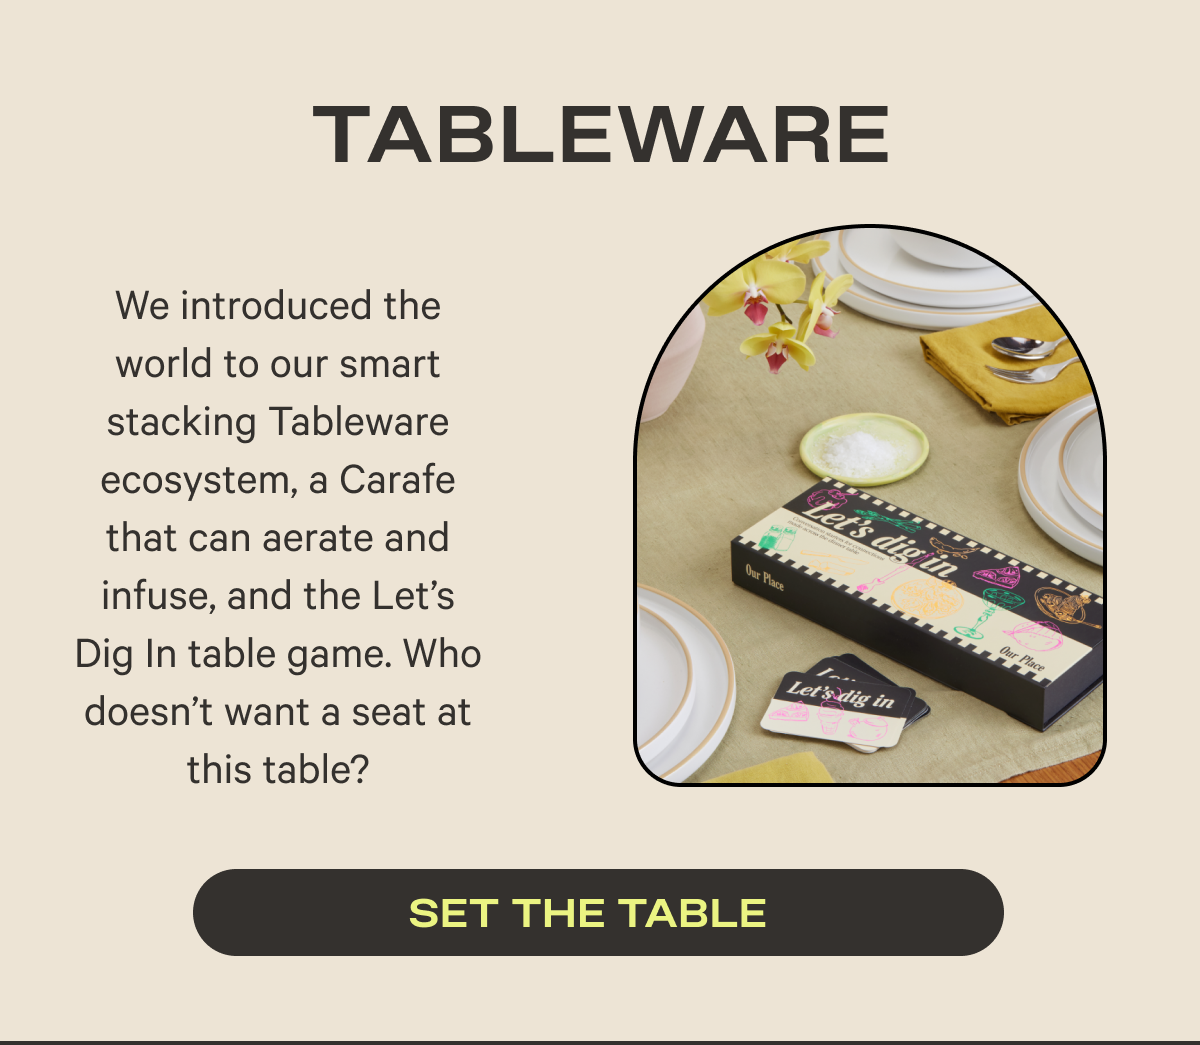 Tableware | We introduced the world to our smart stacking Tableware ecosystem, a Carafe that can aerate and infuse, and the Let’s Dig In table game. Who doesn’t want a seat at this table?